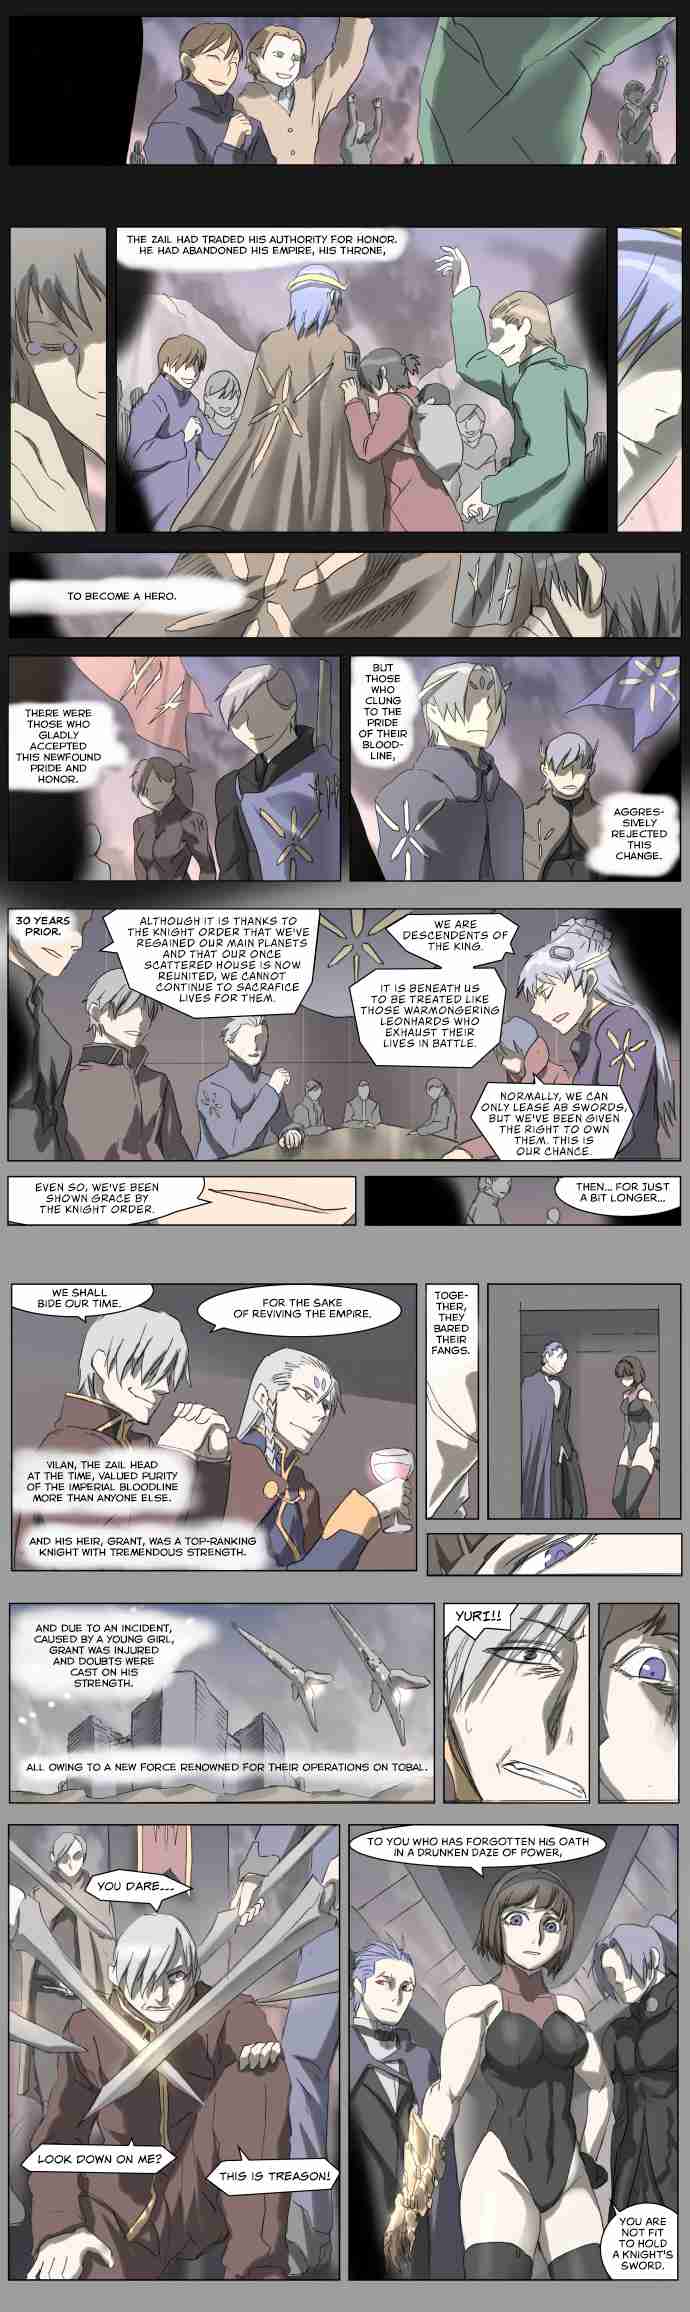 Knight Run Vol. 4 Ch. 199 Knight Fall Part 3 | The Houses of Leonhard and Zail